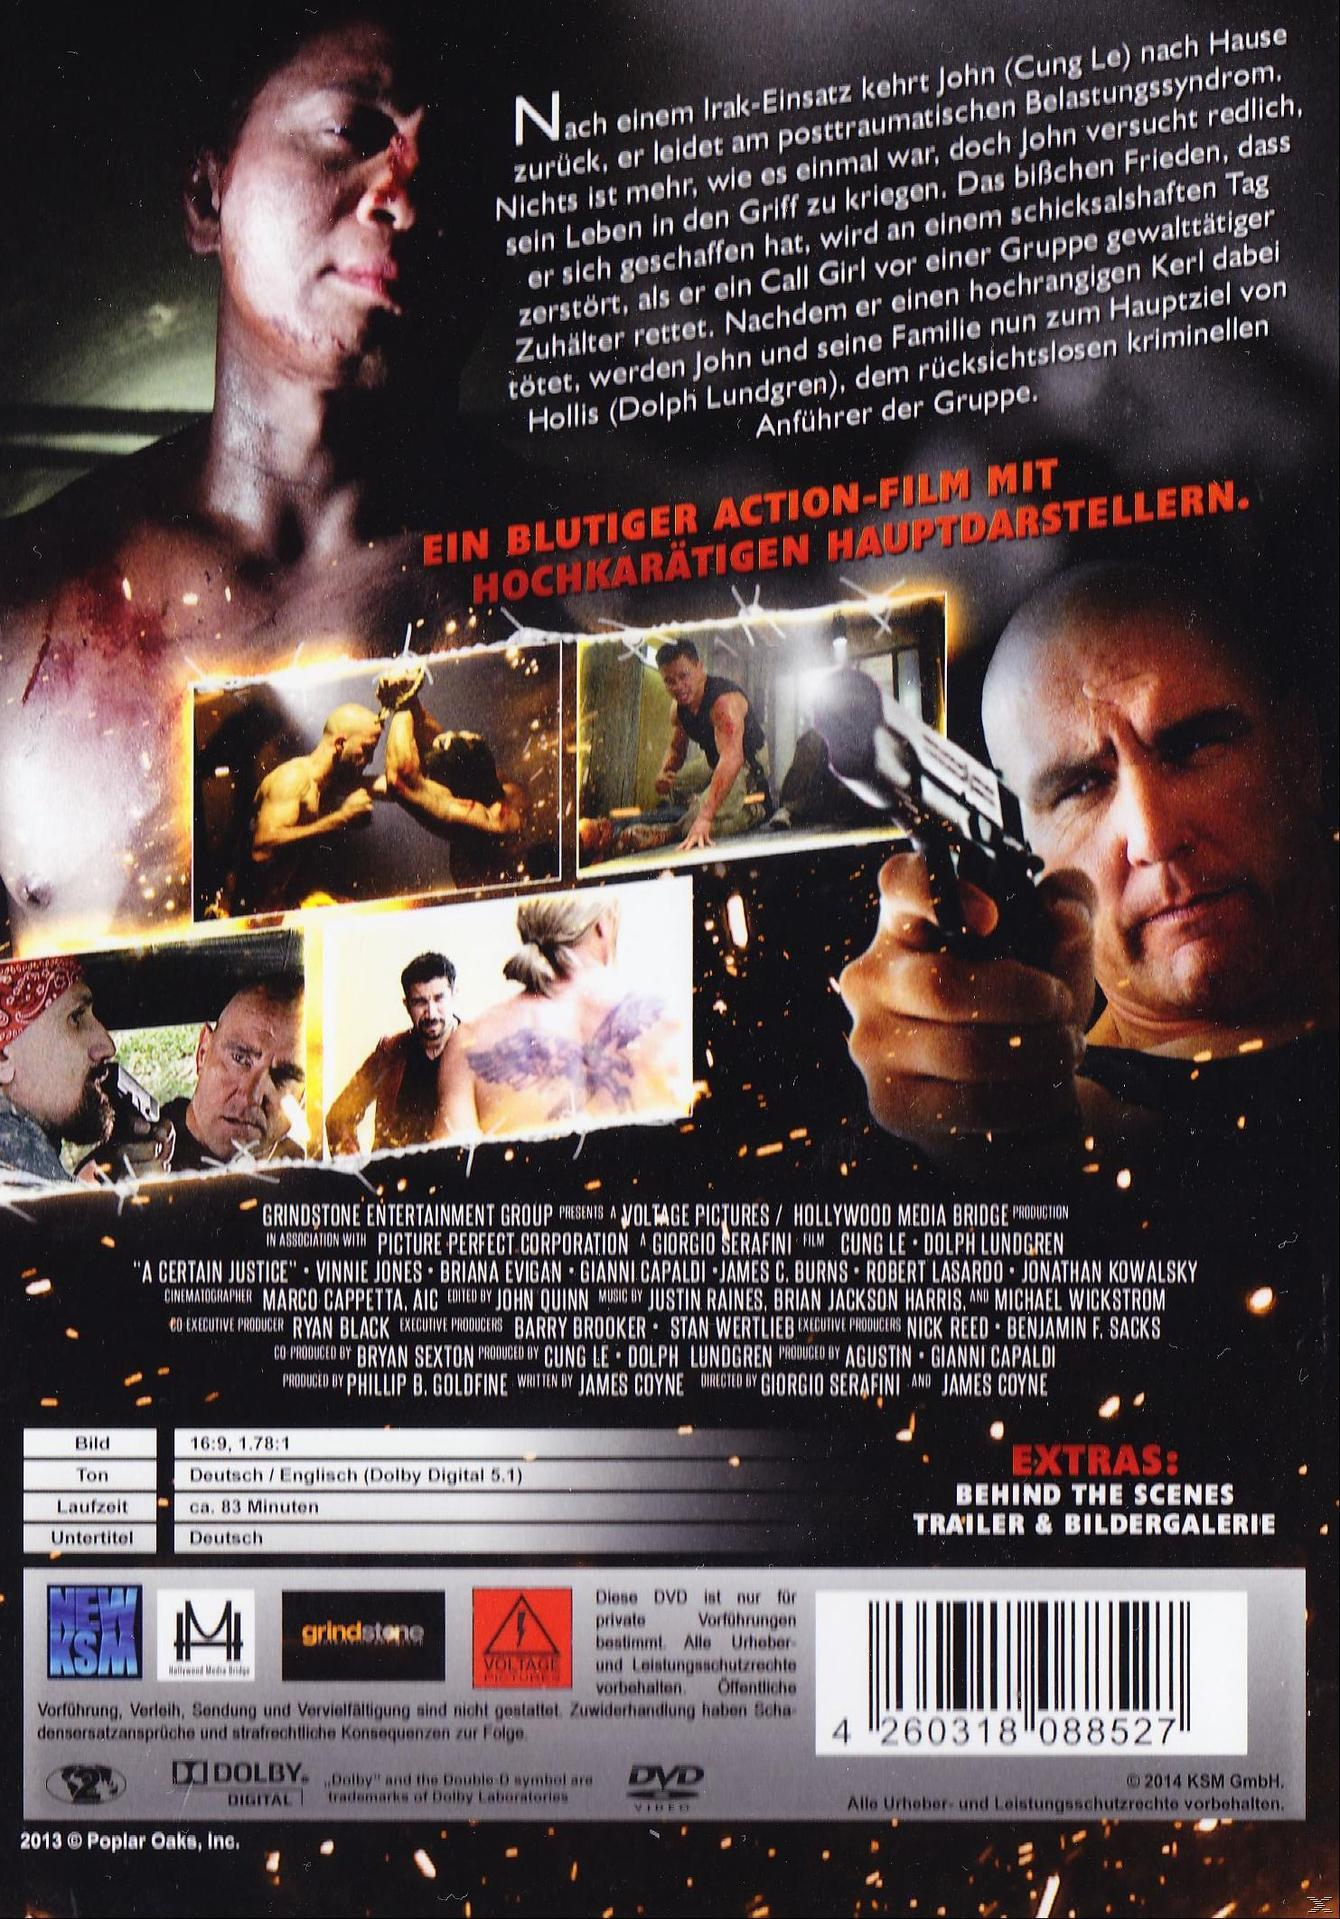 Lethal - or be DVD Punisher killed Kill